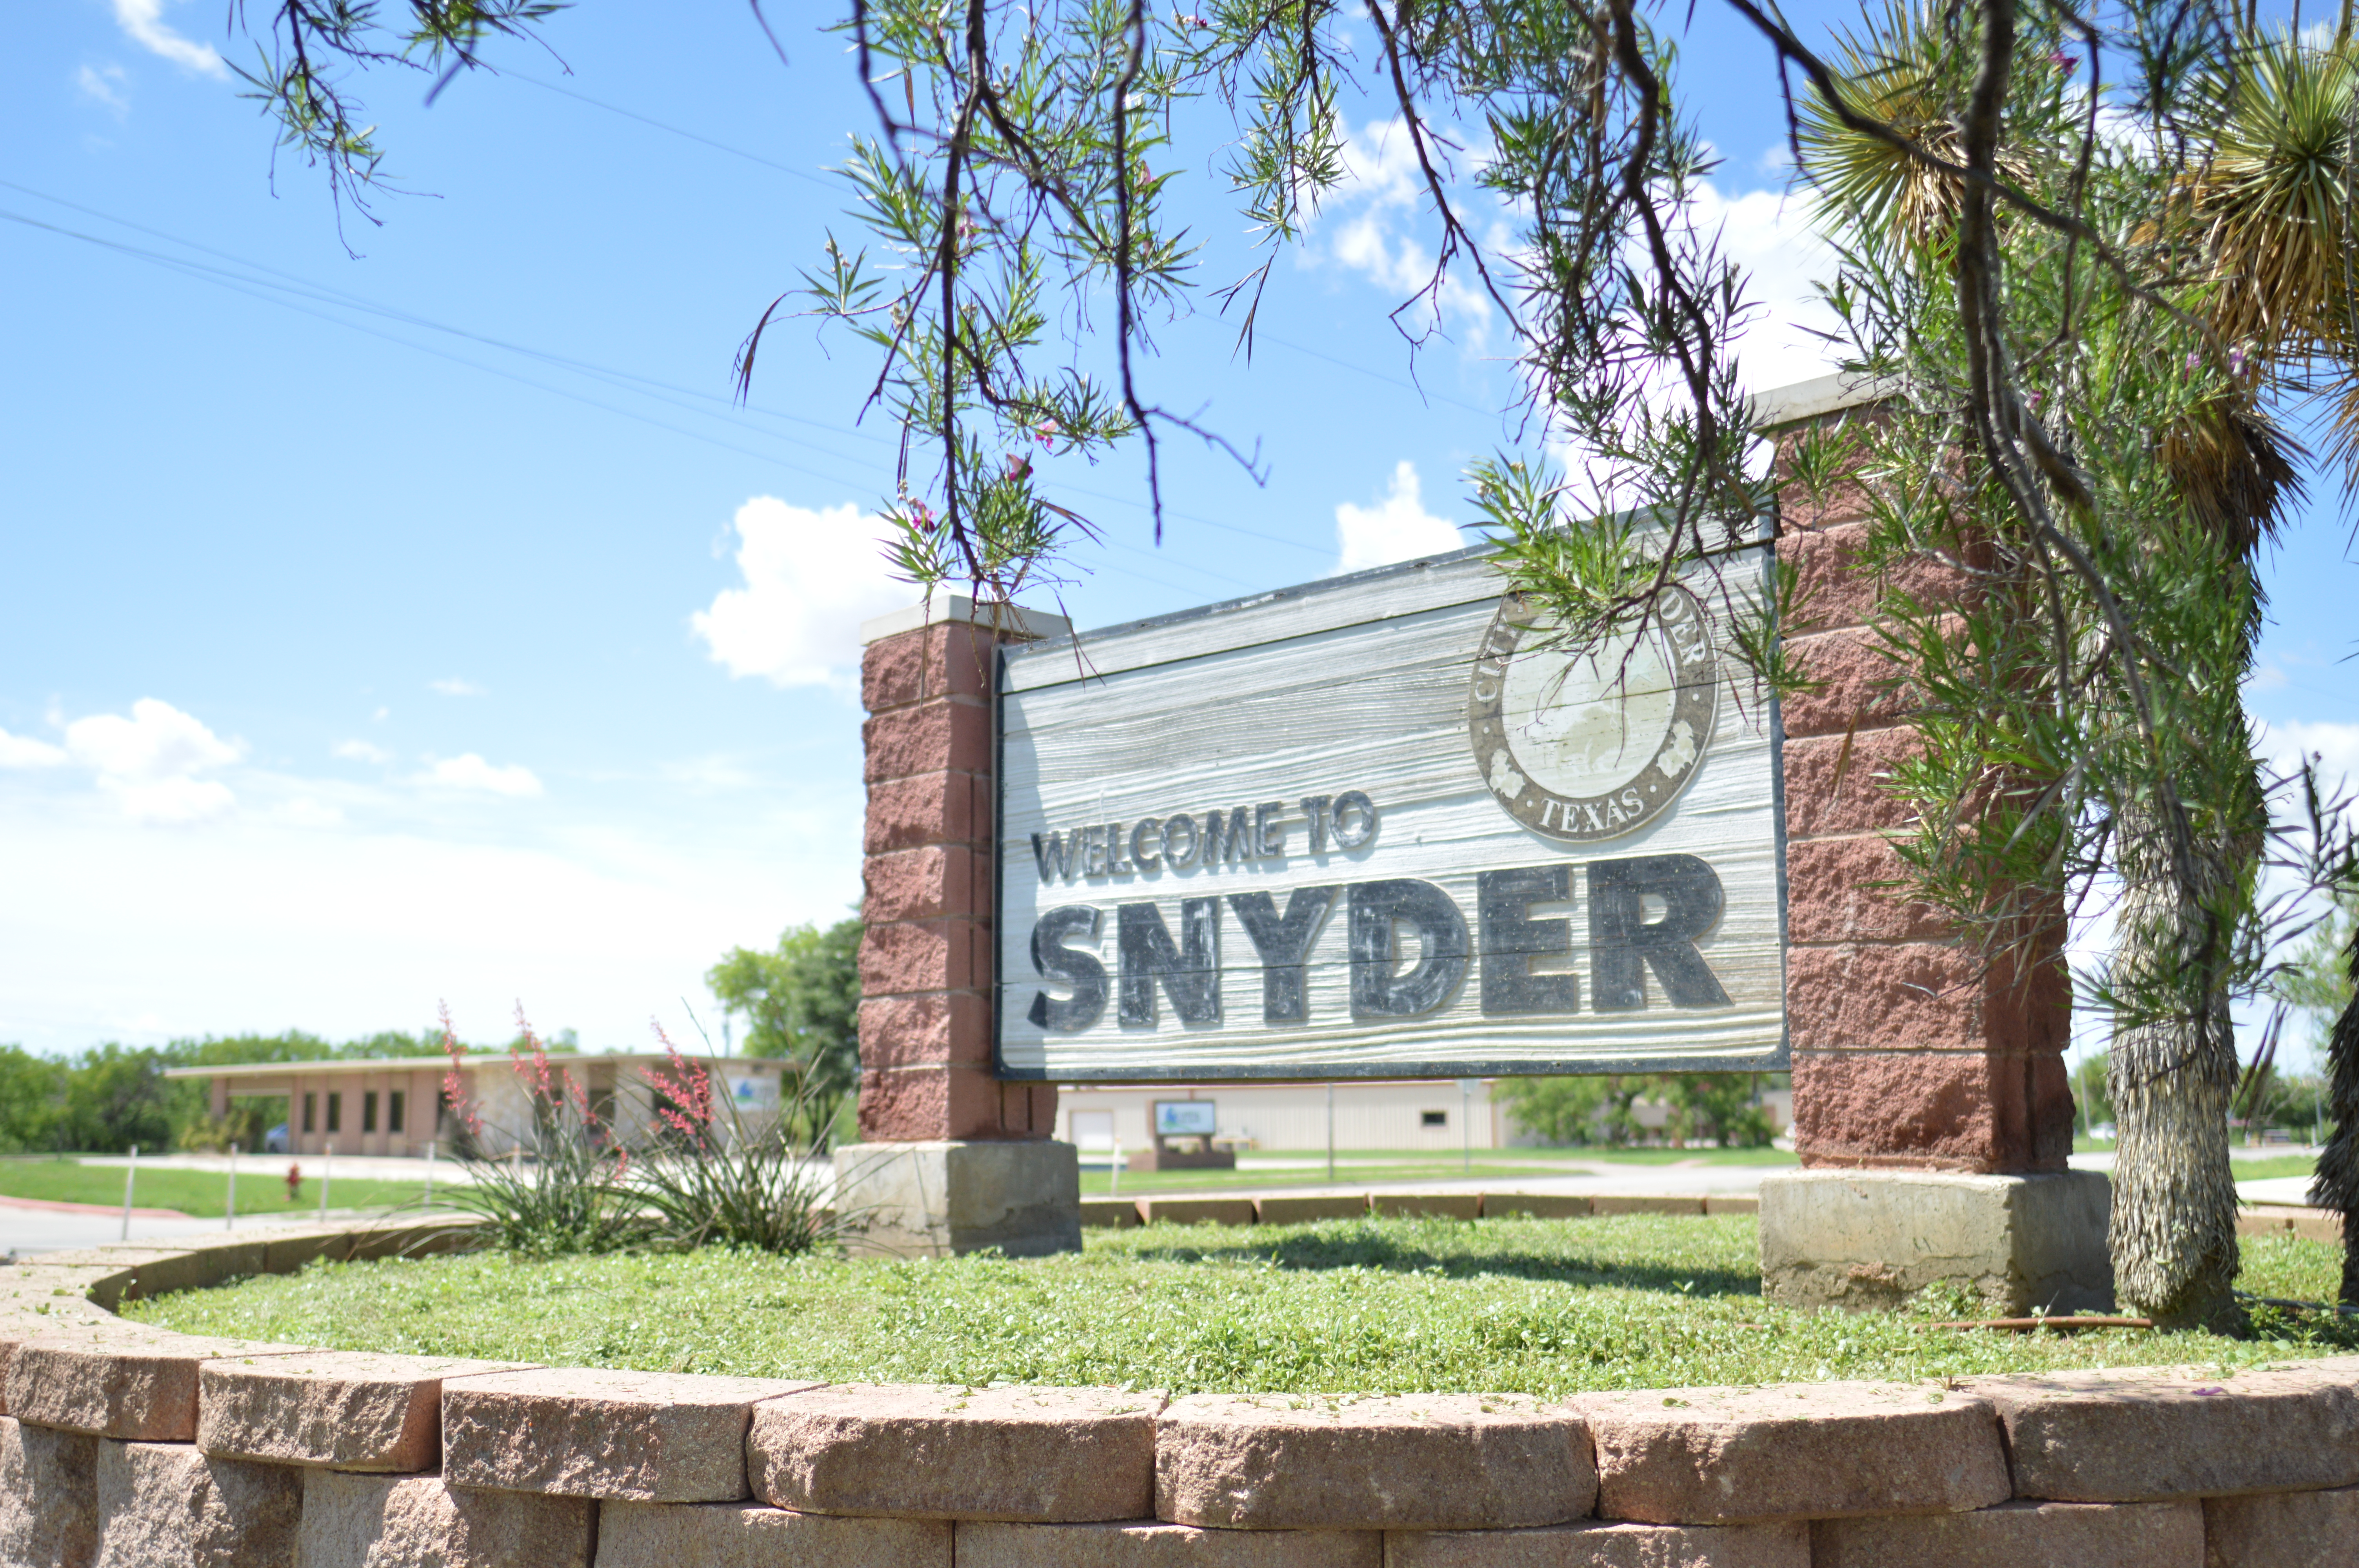 The Development Corporation of Snyder Launches New Website, Brand